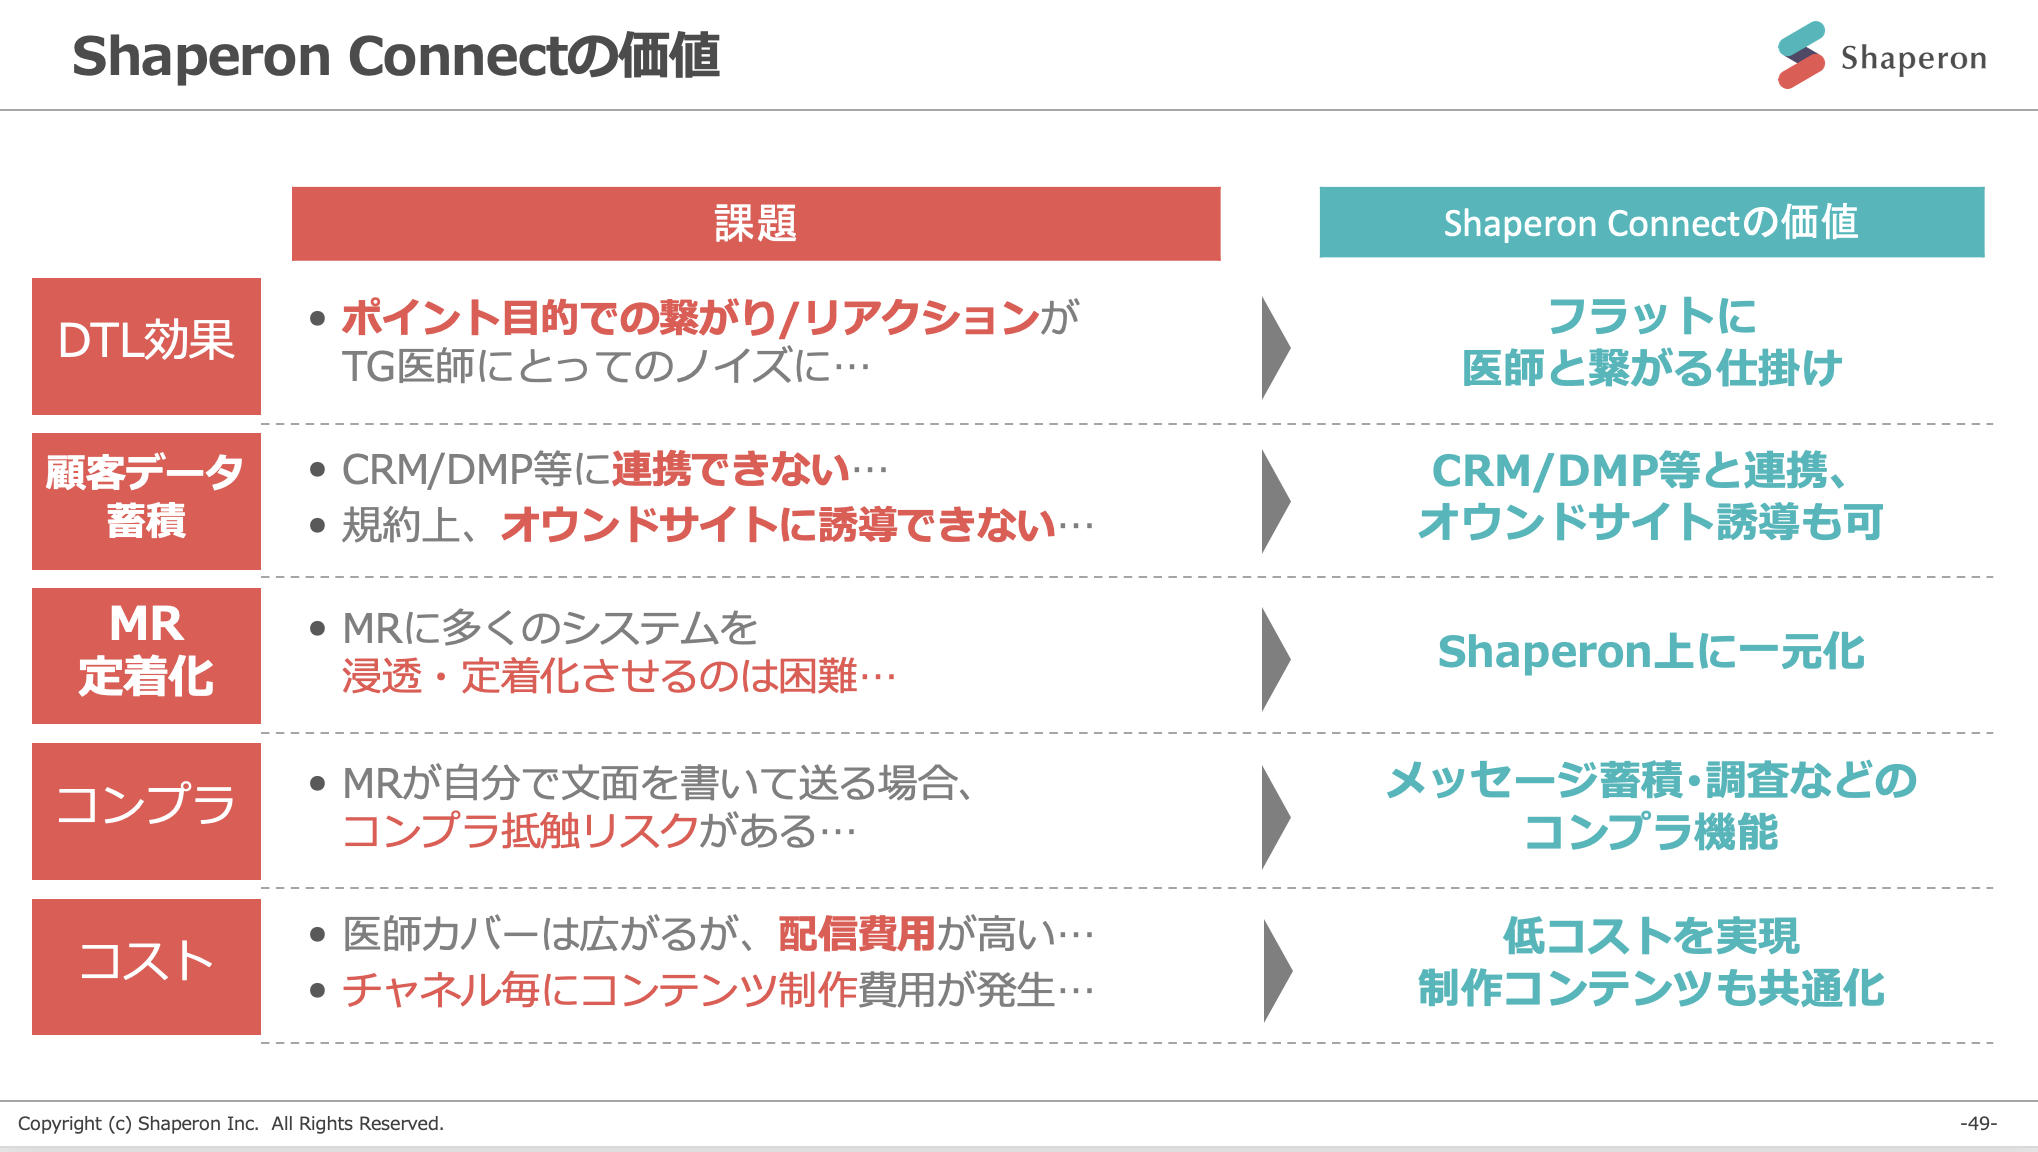 Shaperon Connectの価値